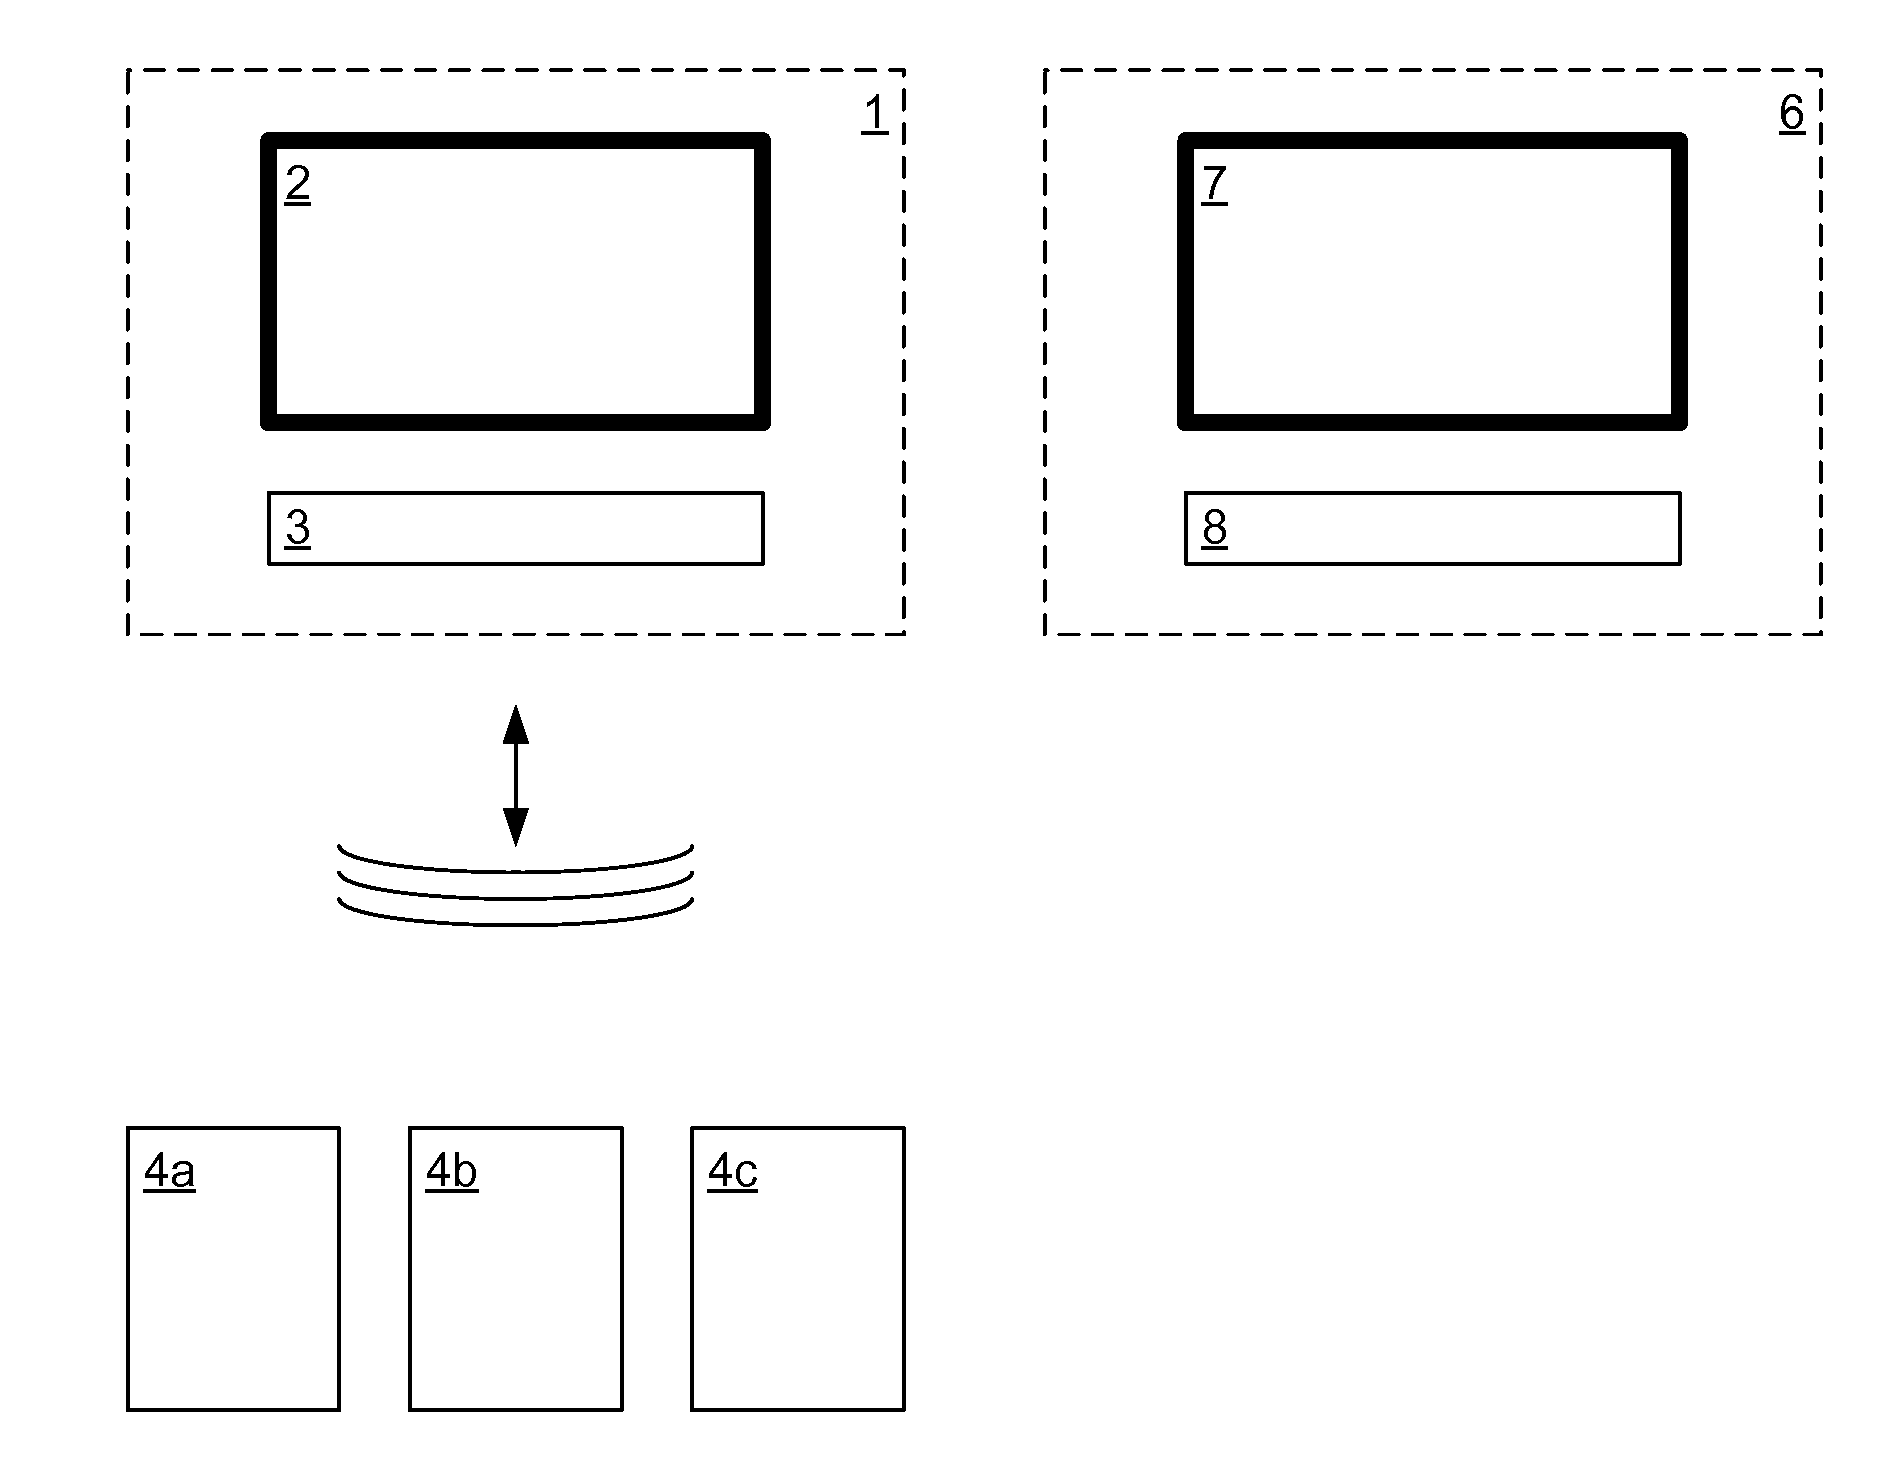 Television decoding unit with multiple wireless access modules